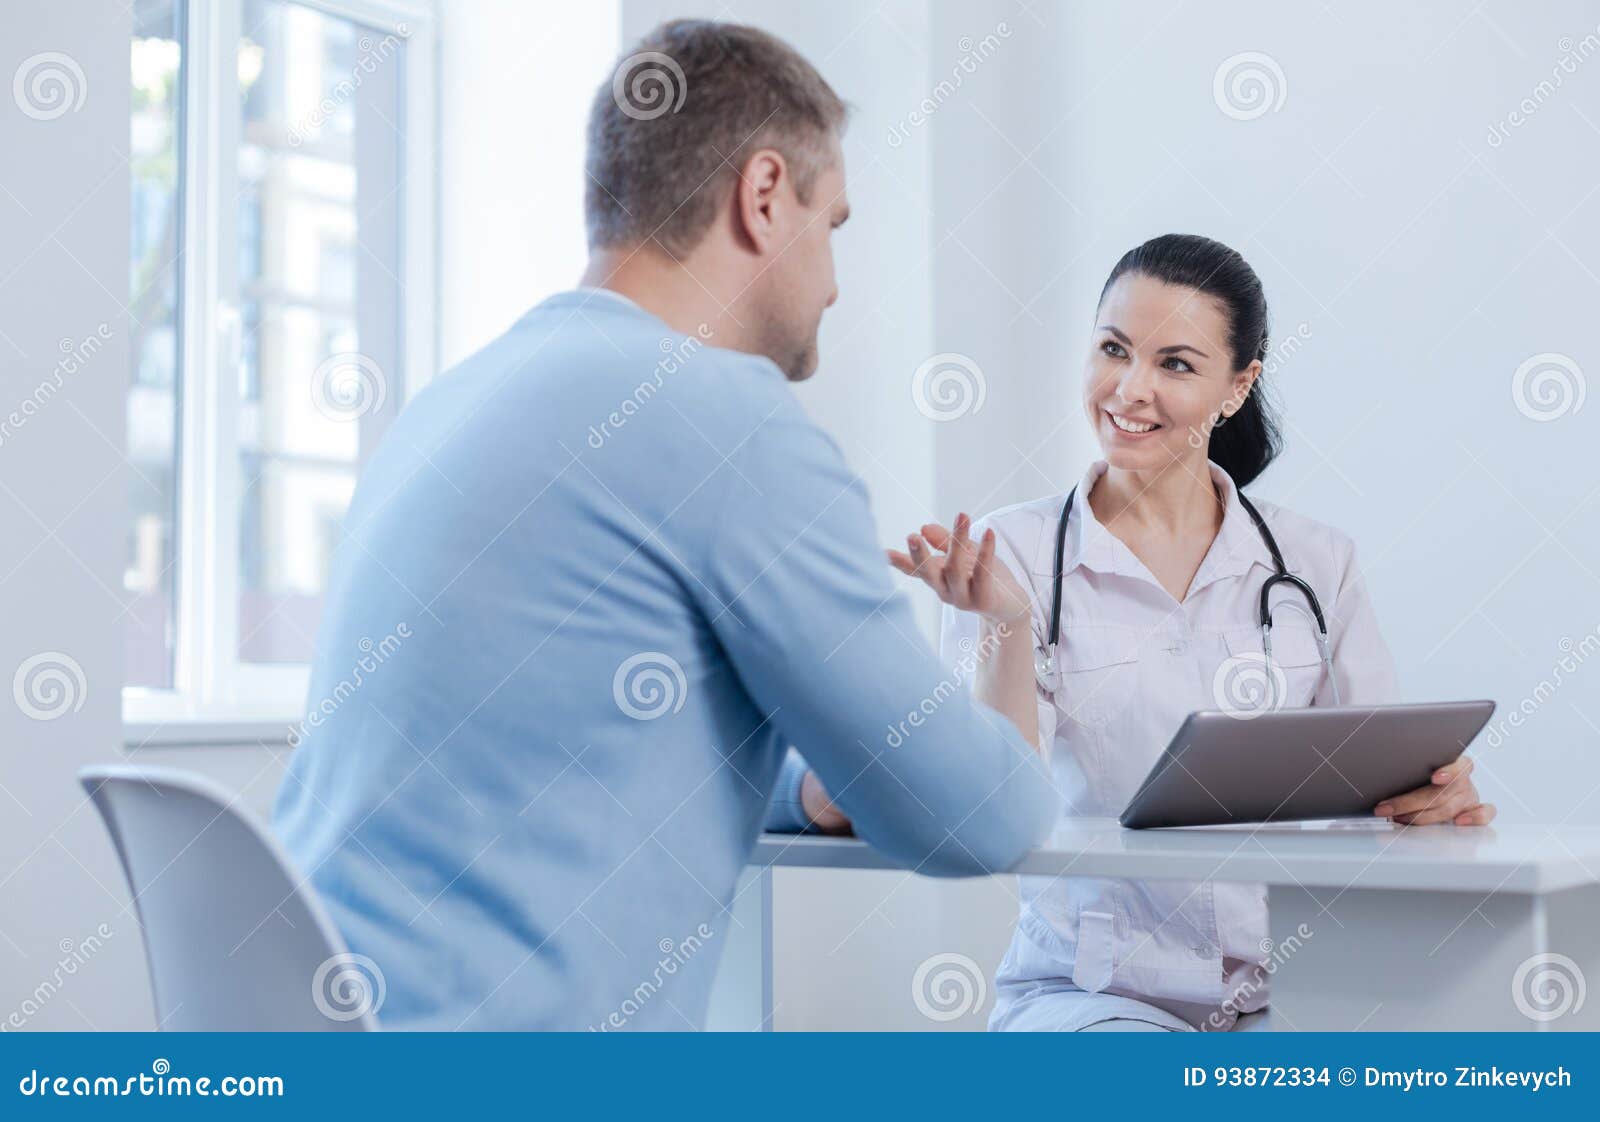 nice doctor enjoying appointment in the hospital